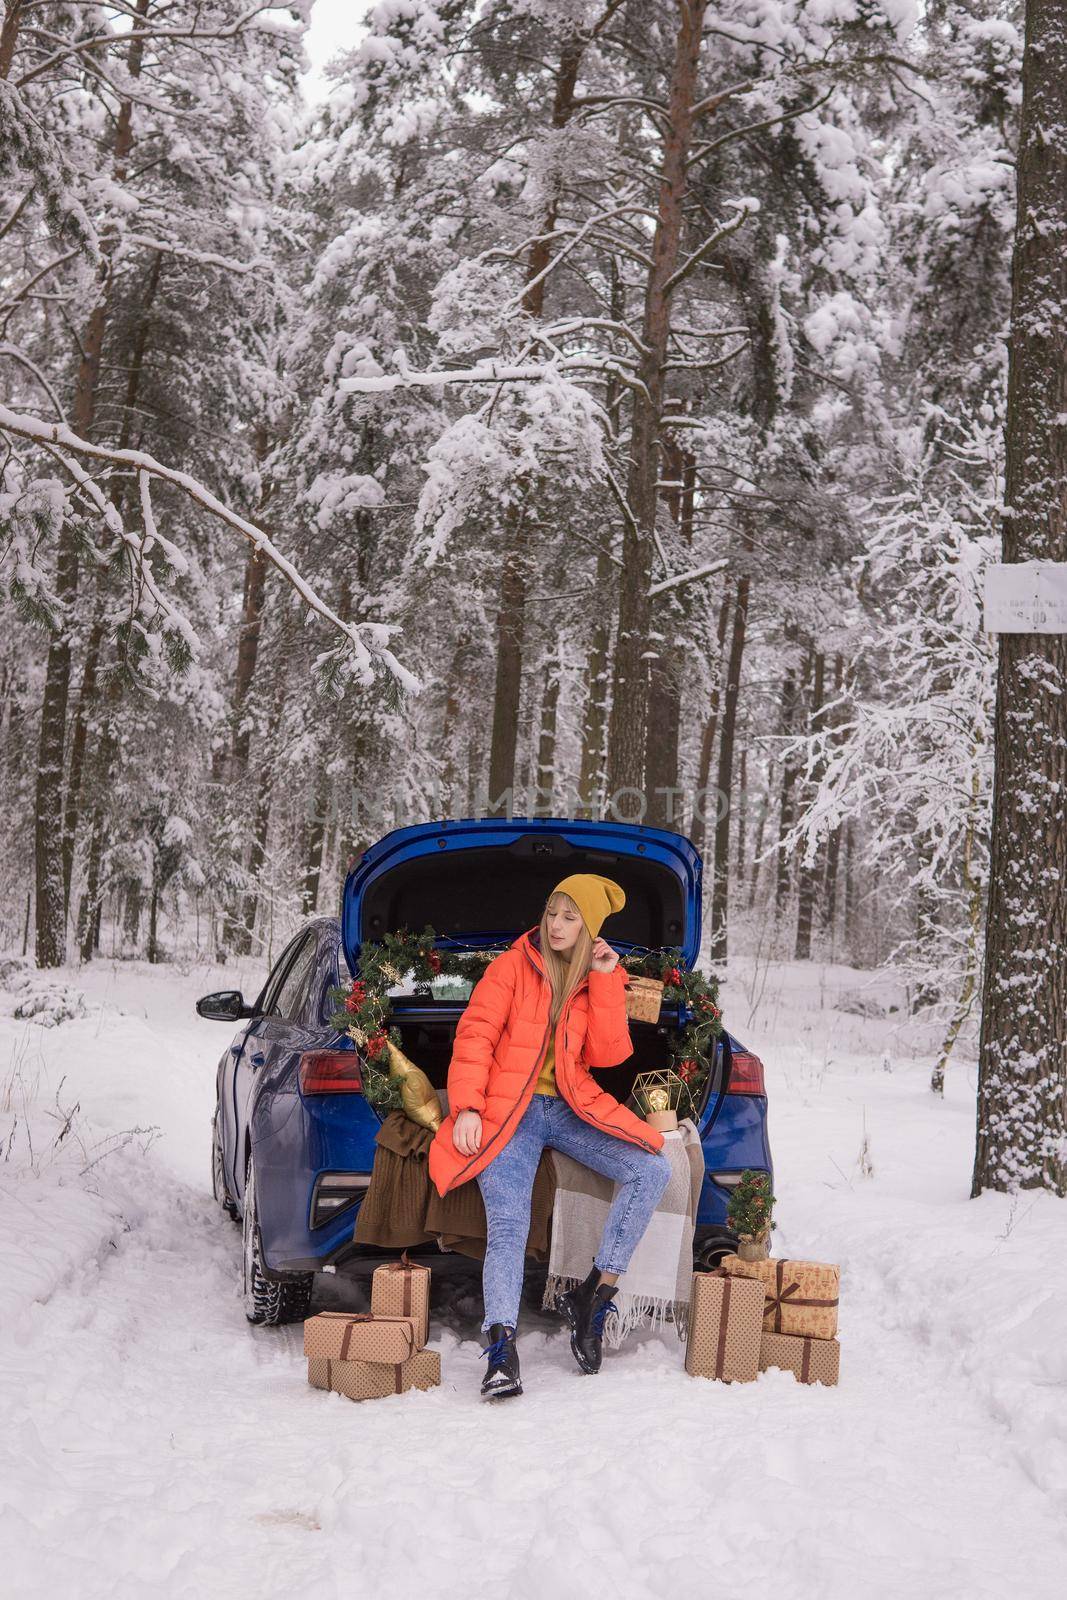 A woman in a winter snow-covered forest in the trunk of a blue car decorated with Christmas decor. The concept of Christmas and winter holidays.